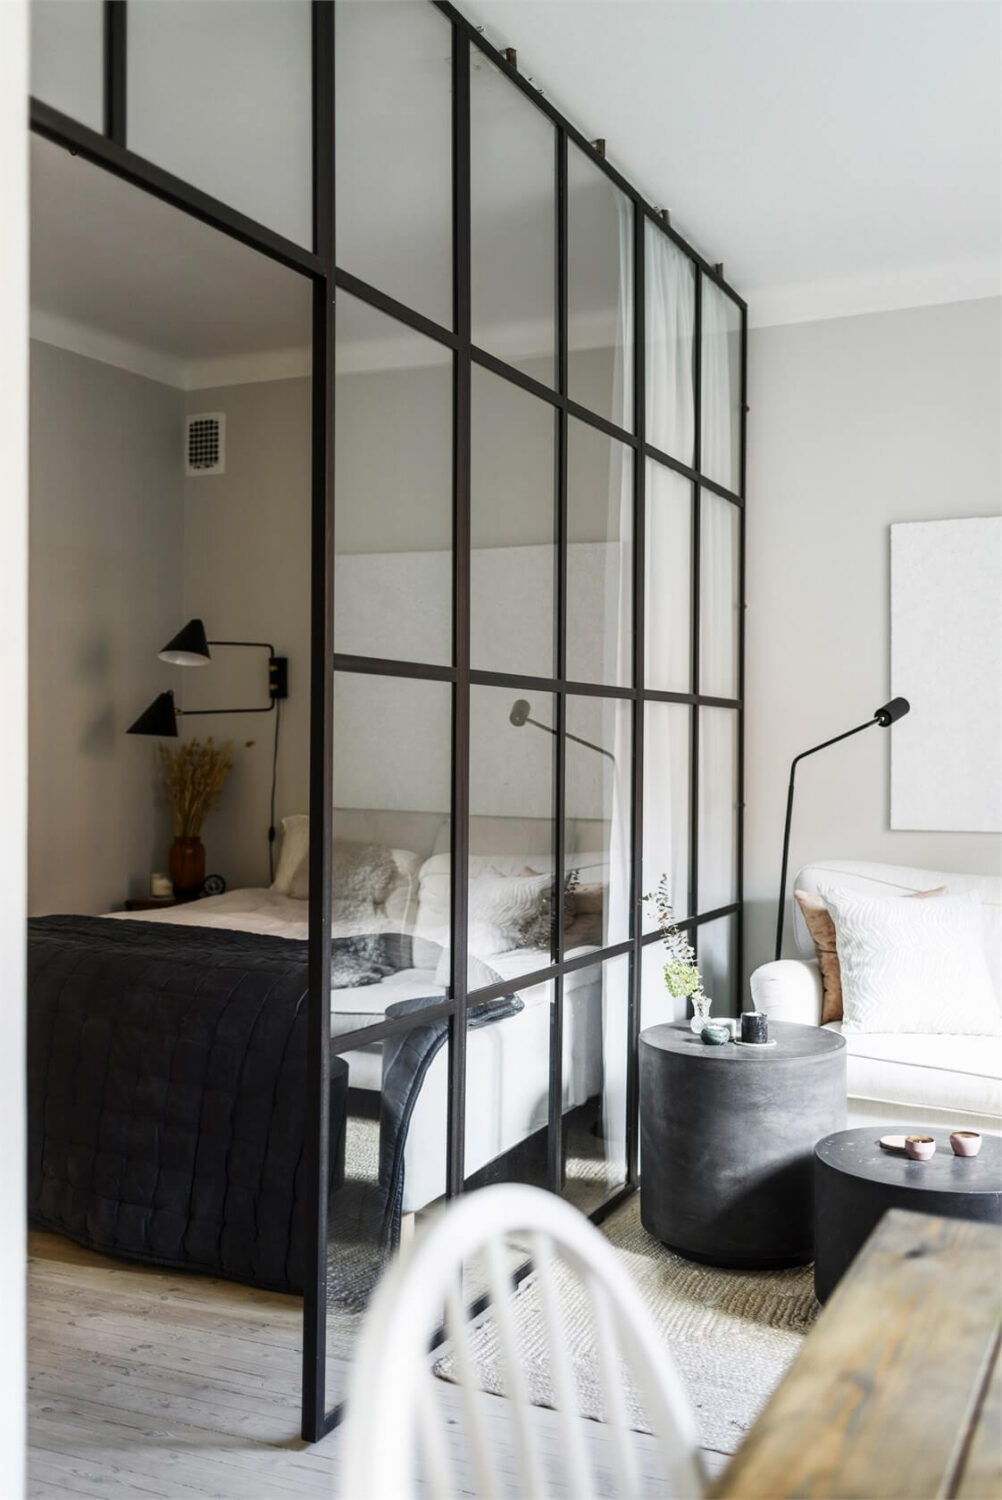 living-room-bedroom-combos-glass-partition-wall-nordroom